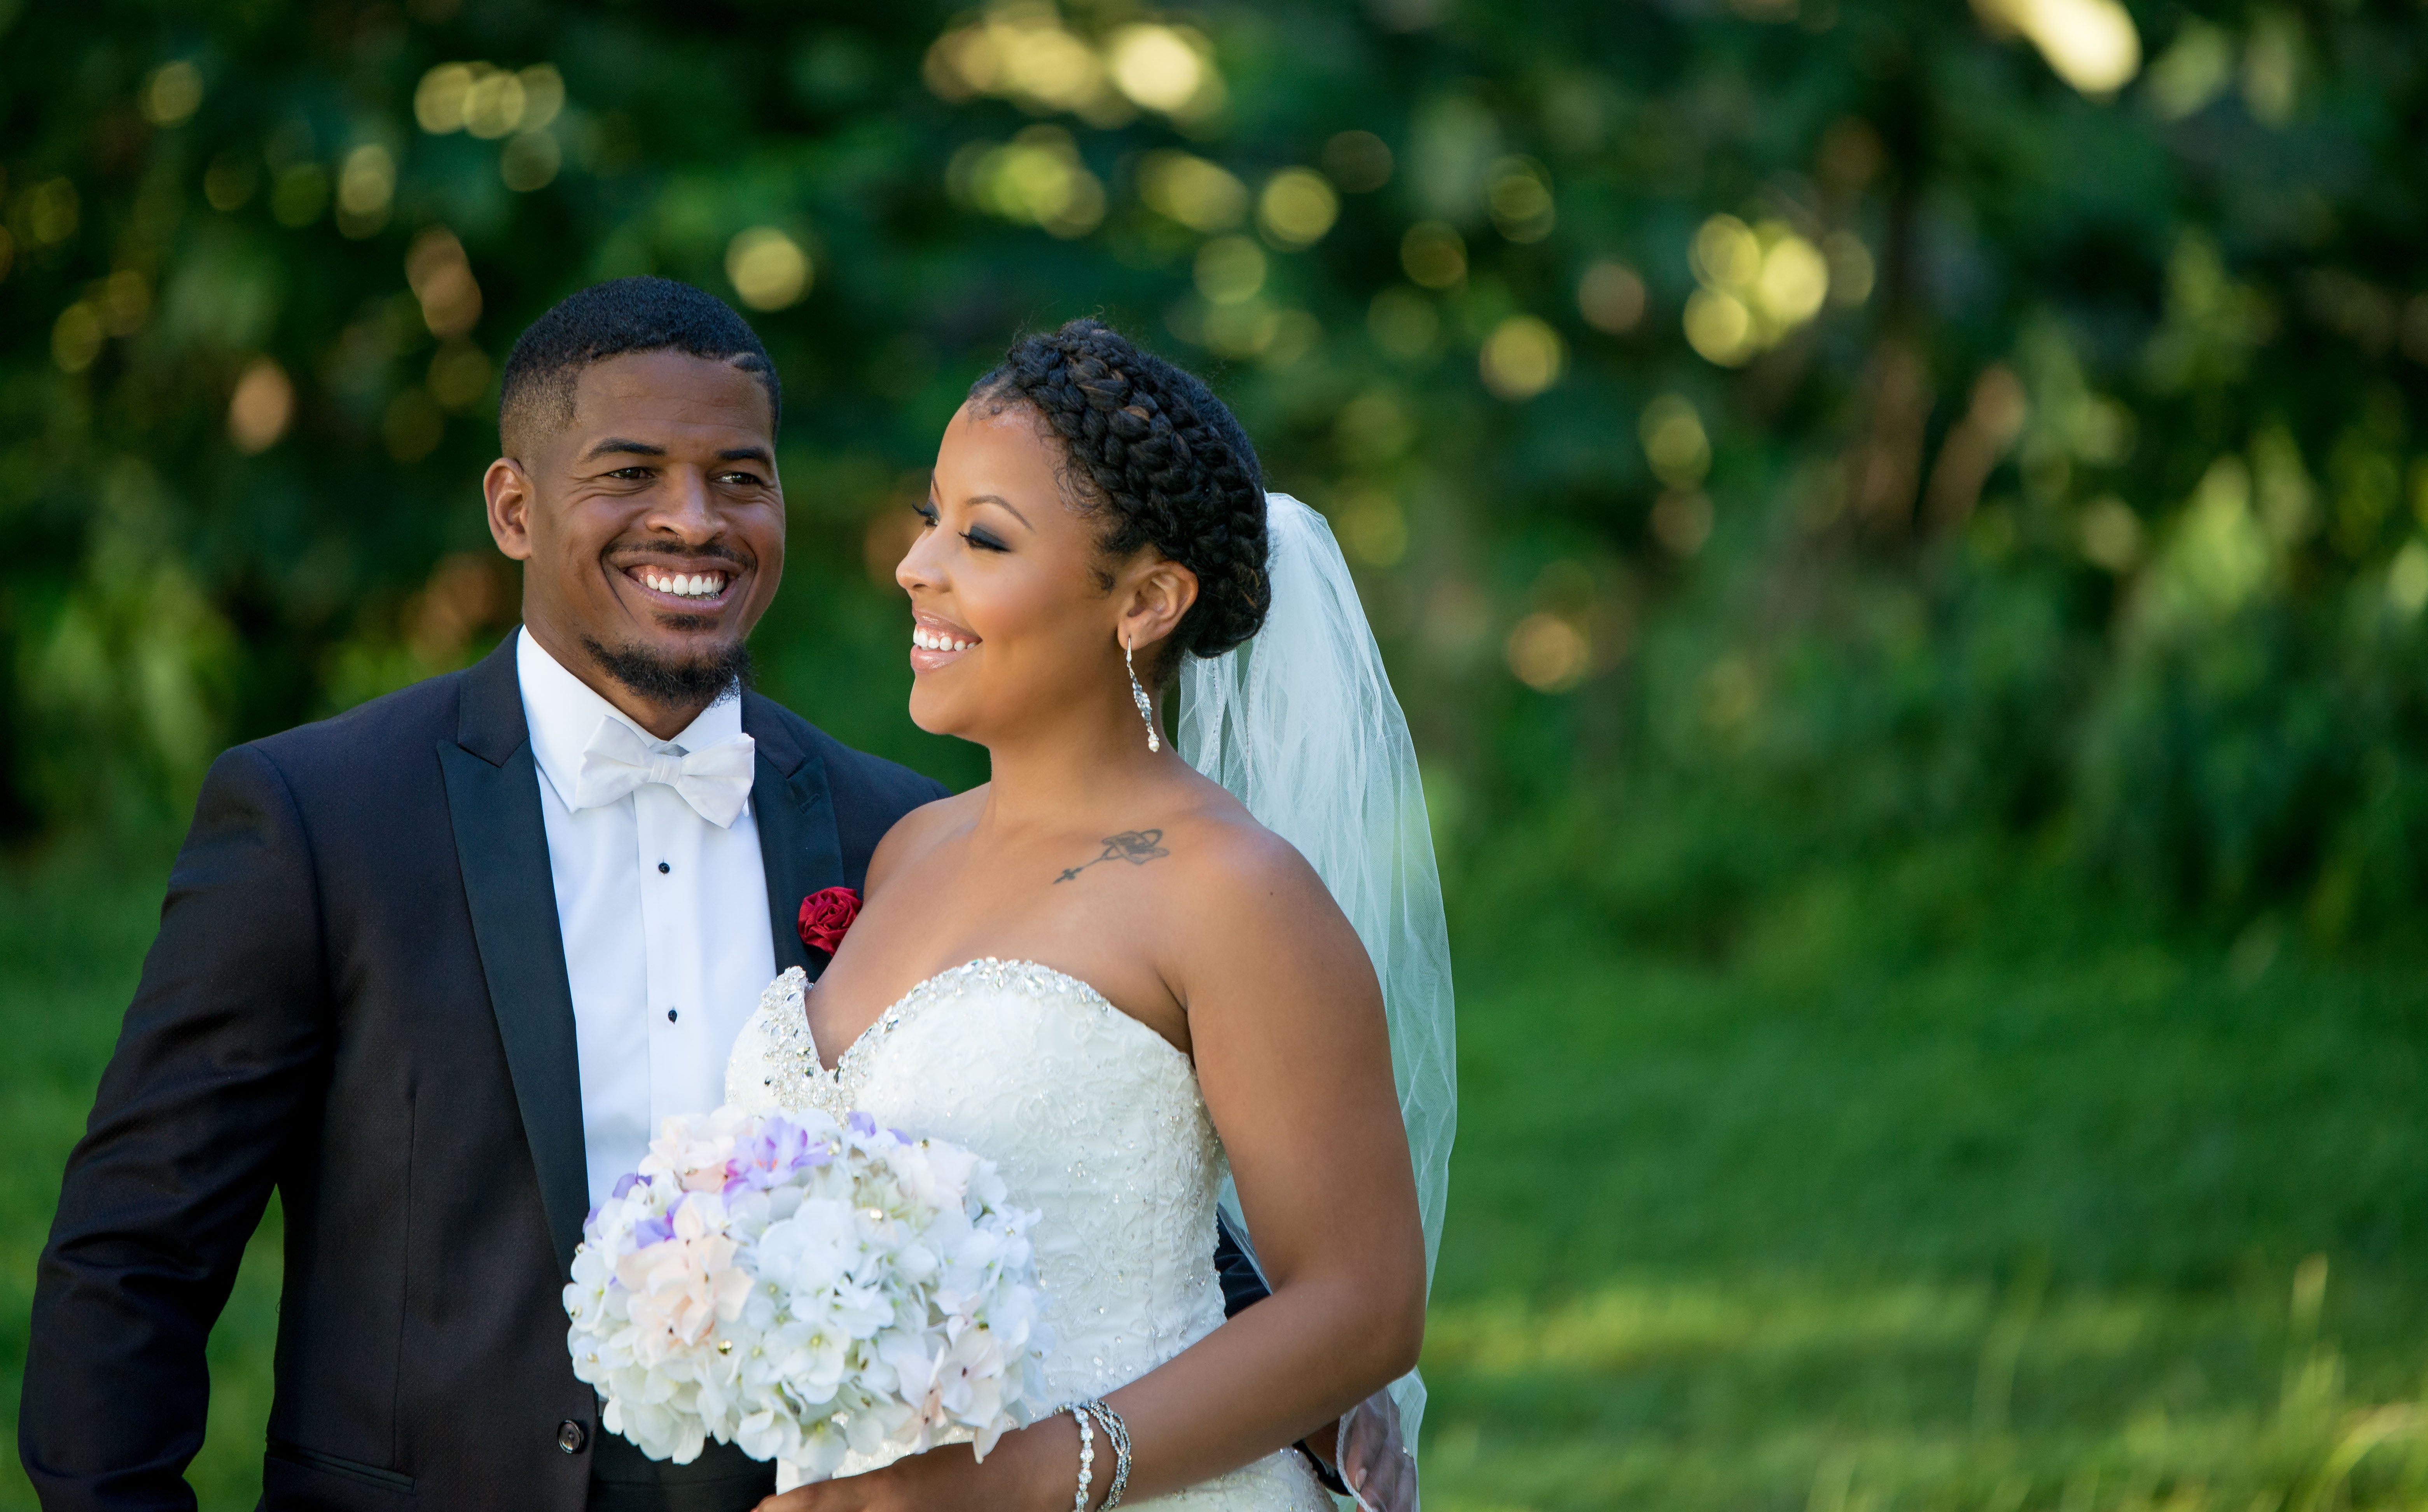 Bridal Bliss: Eugene And Vecoya's DIY Wedding Was A Beautiful Dream Come True
